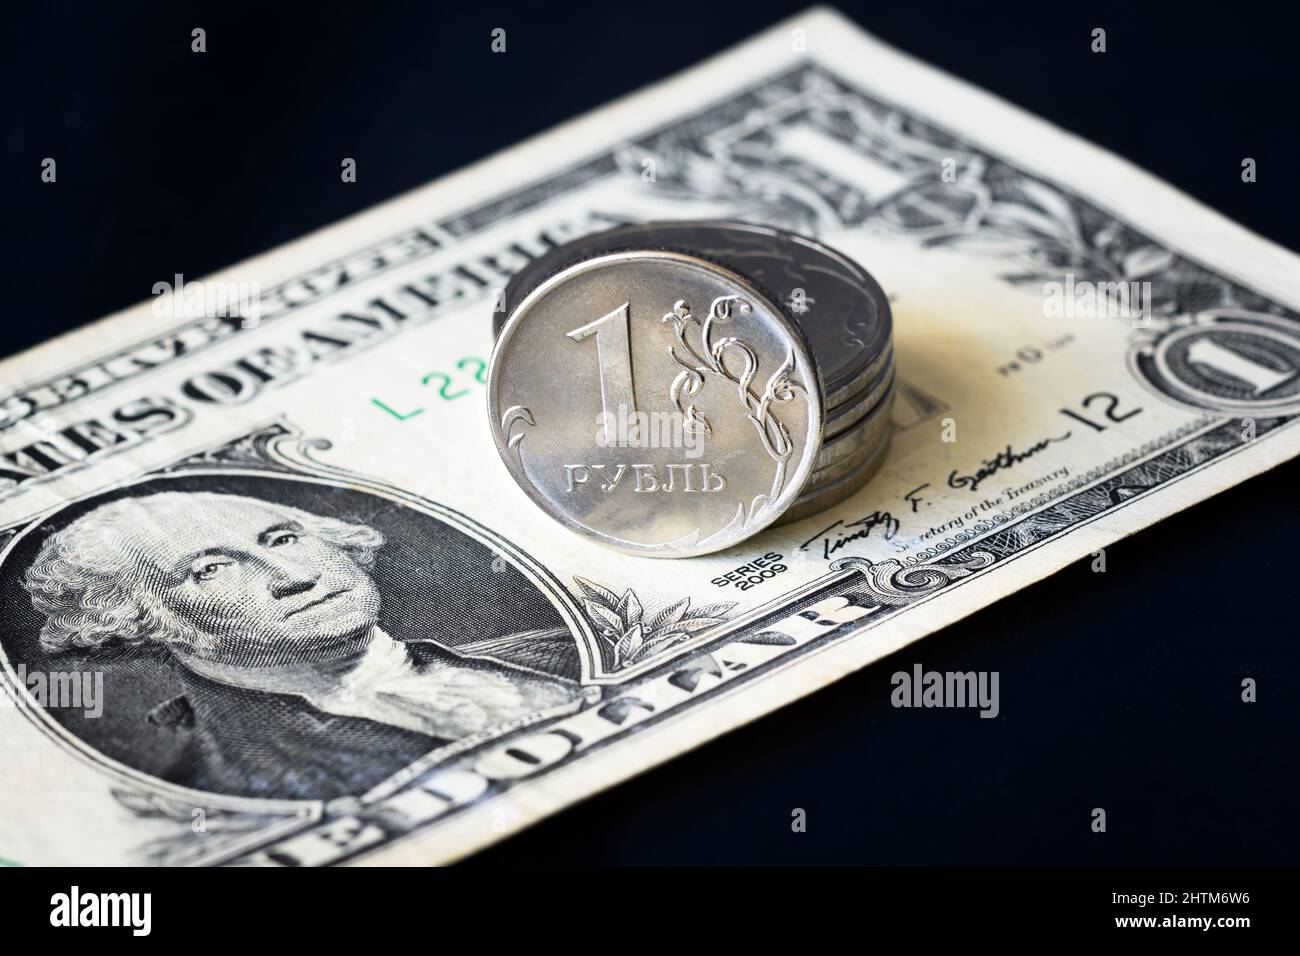 Russian ruble coin and one US dollar bill, ruble money is under pressure from geopolitics. Concept of currency exchange rate, ruble devaluation, infla Stock Photo